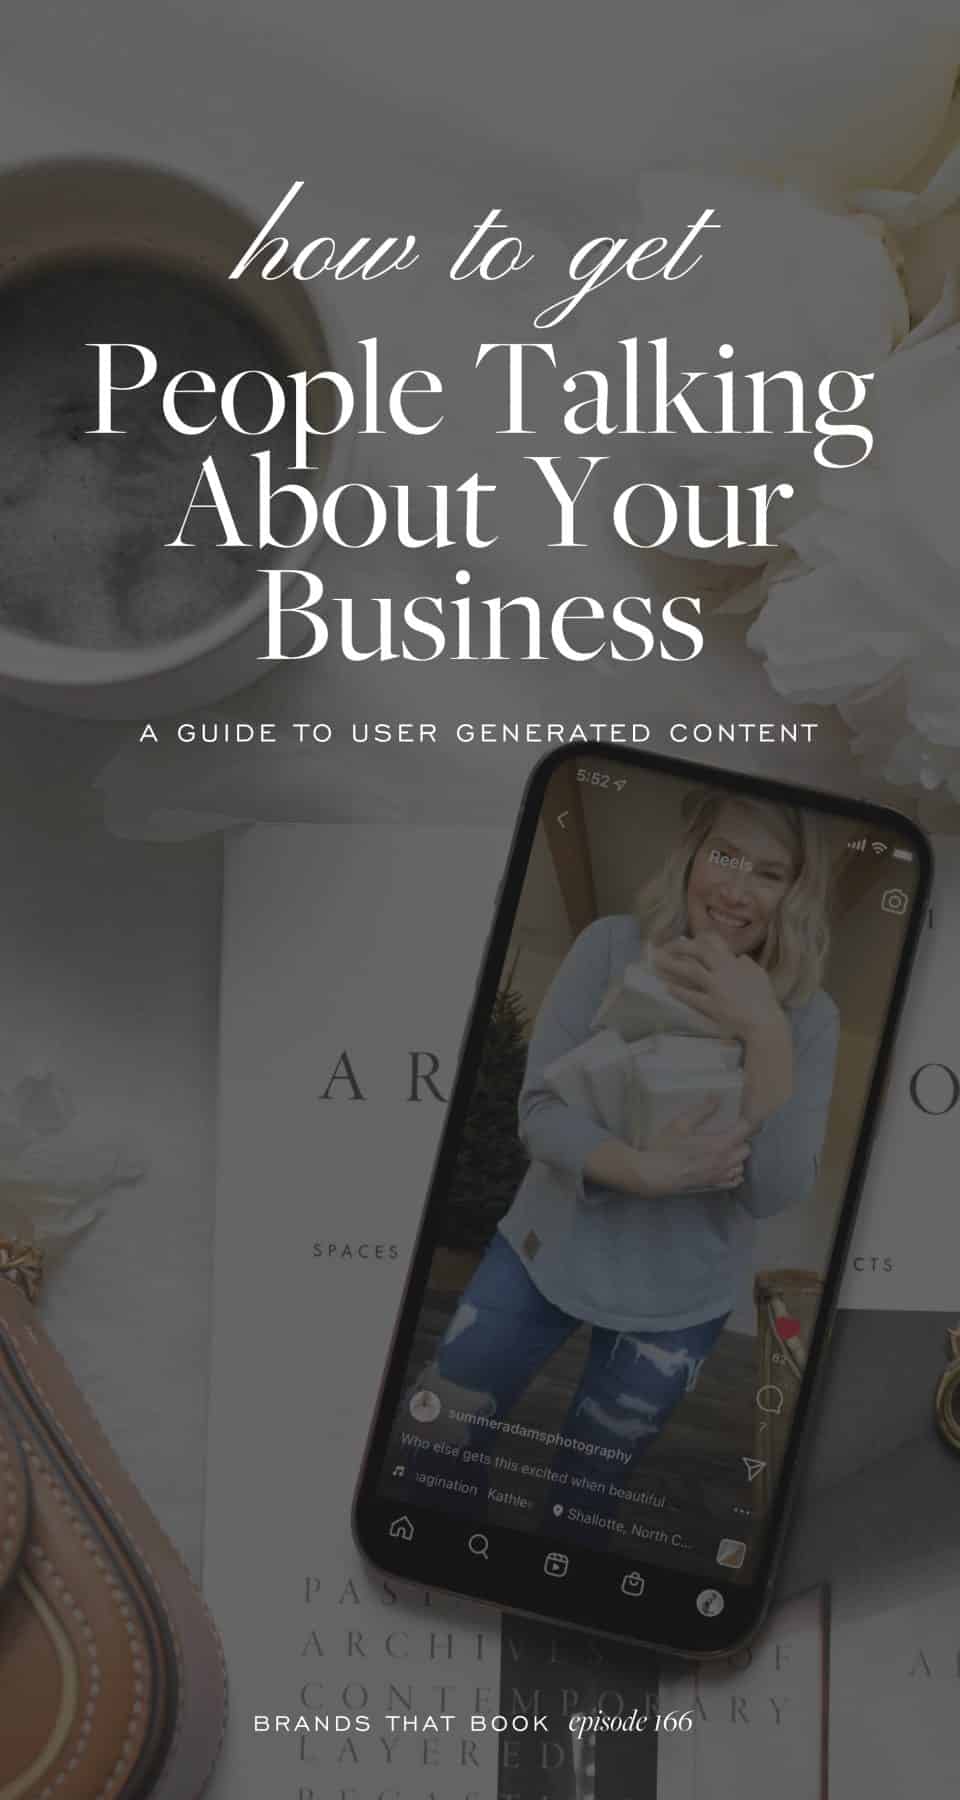 How to Get People Talking About Your Business - A Guide to User Generated Content | Davey & Krista